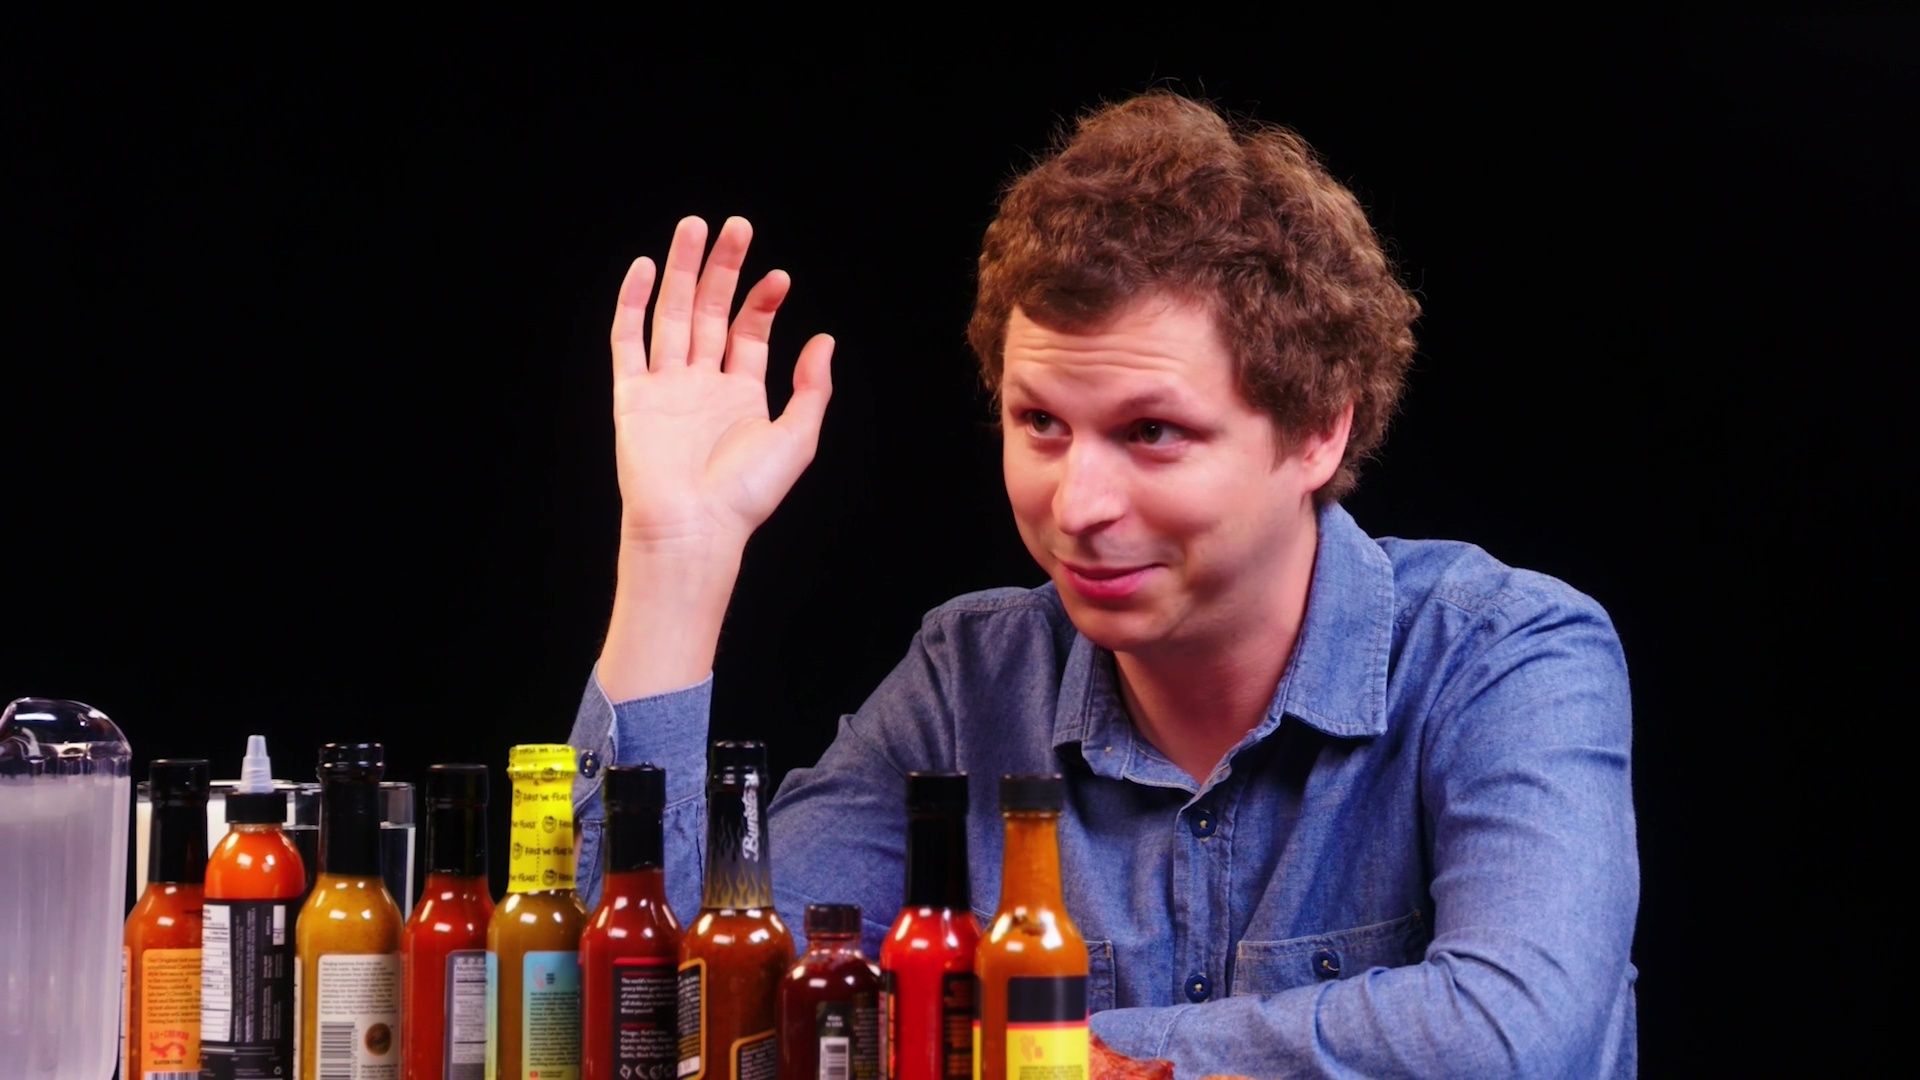 Michael Cera Experiences Mouth Pains While Eating Spicy Wings